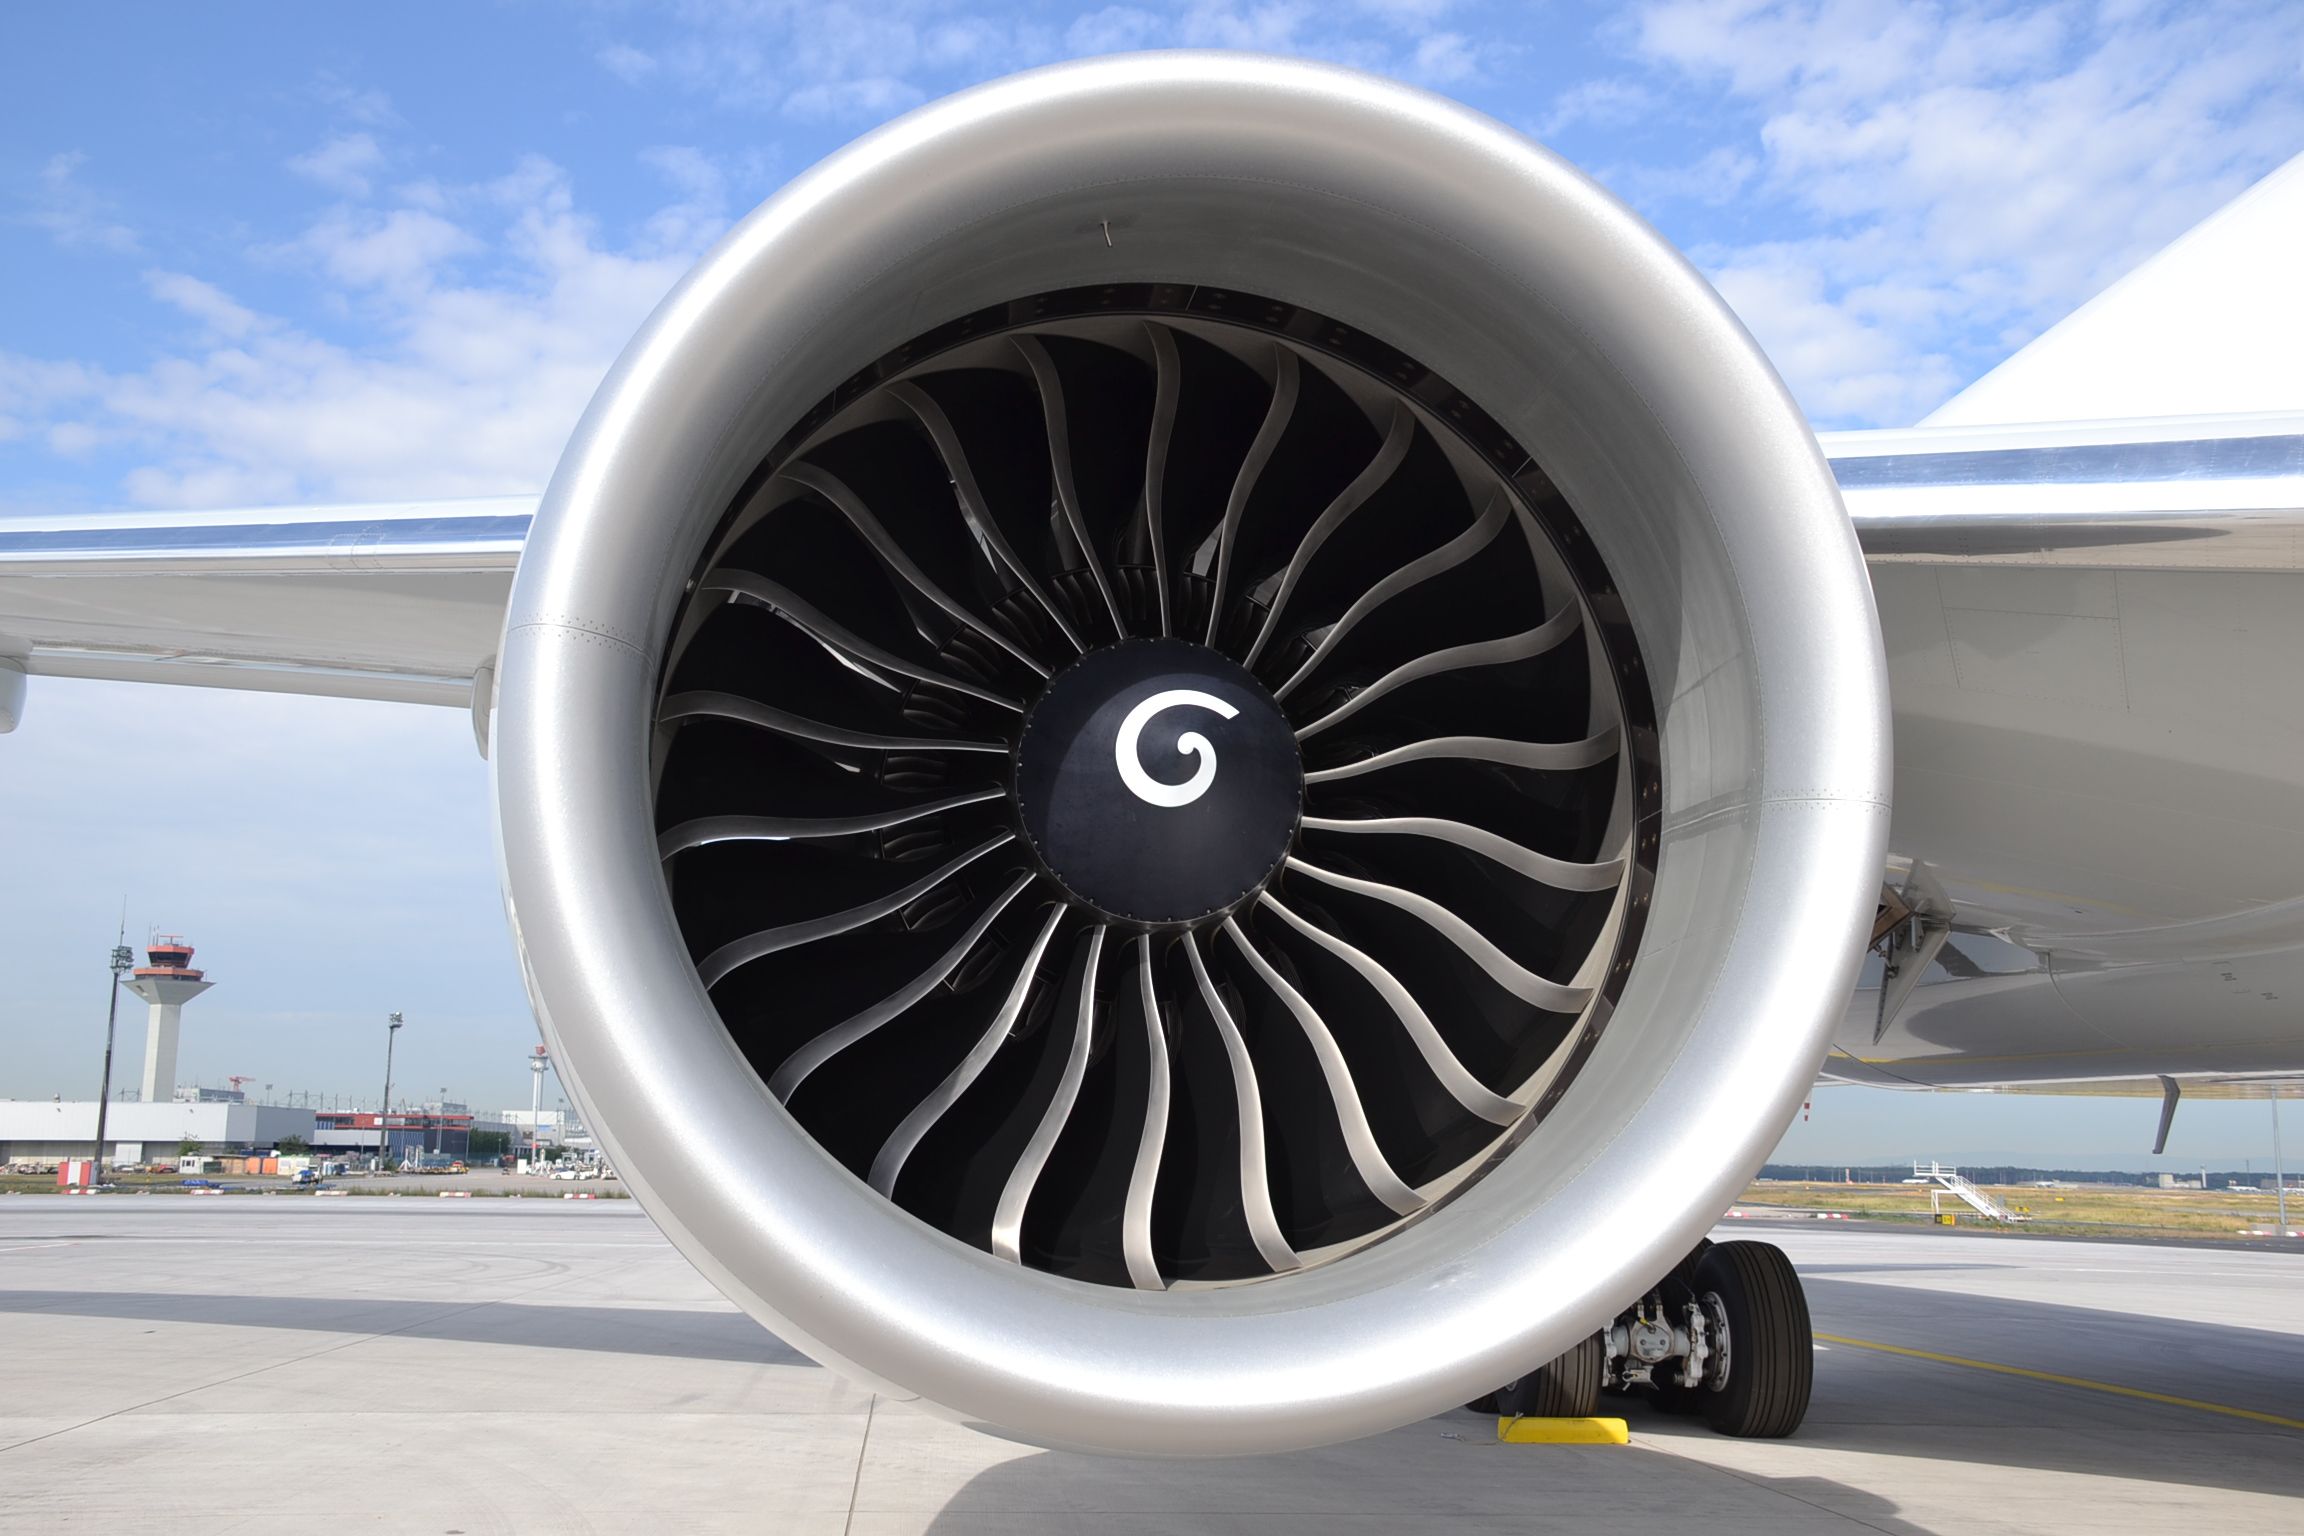 The General Electric GE90 engine on a Boeing 777 aircraft.